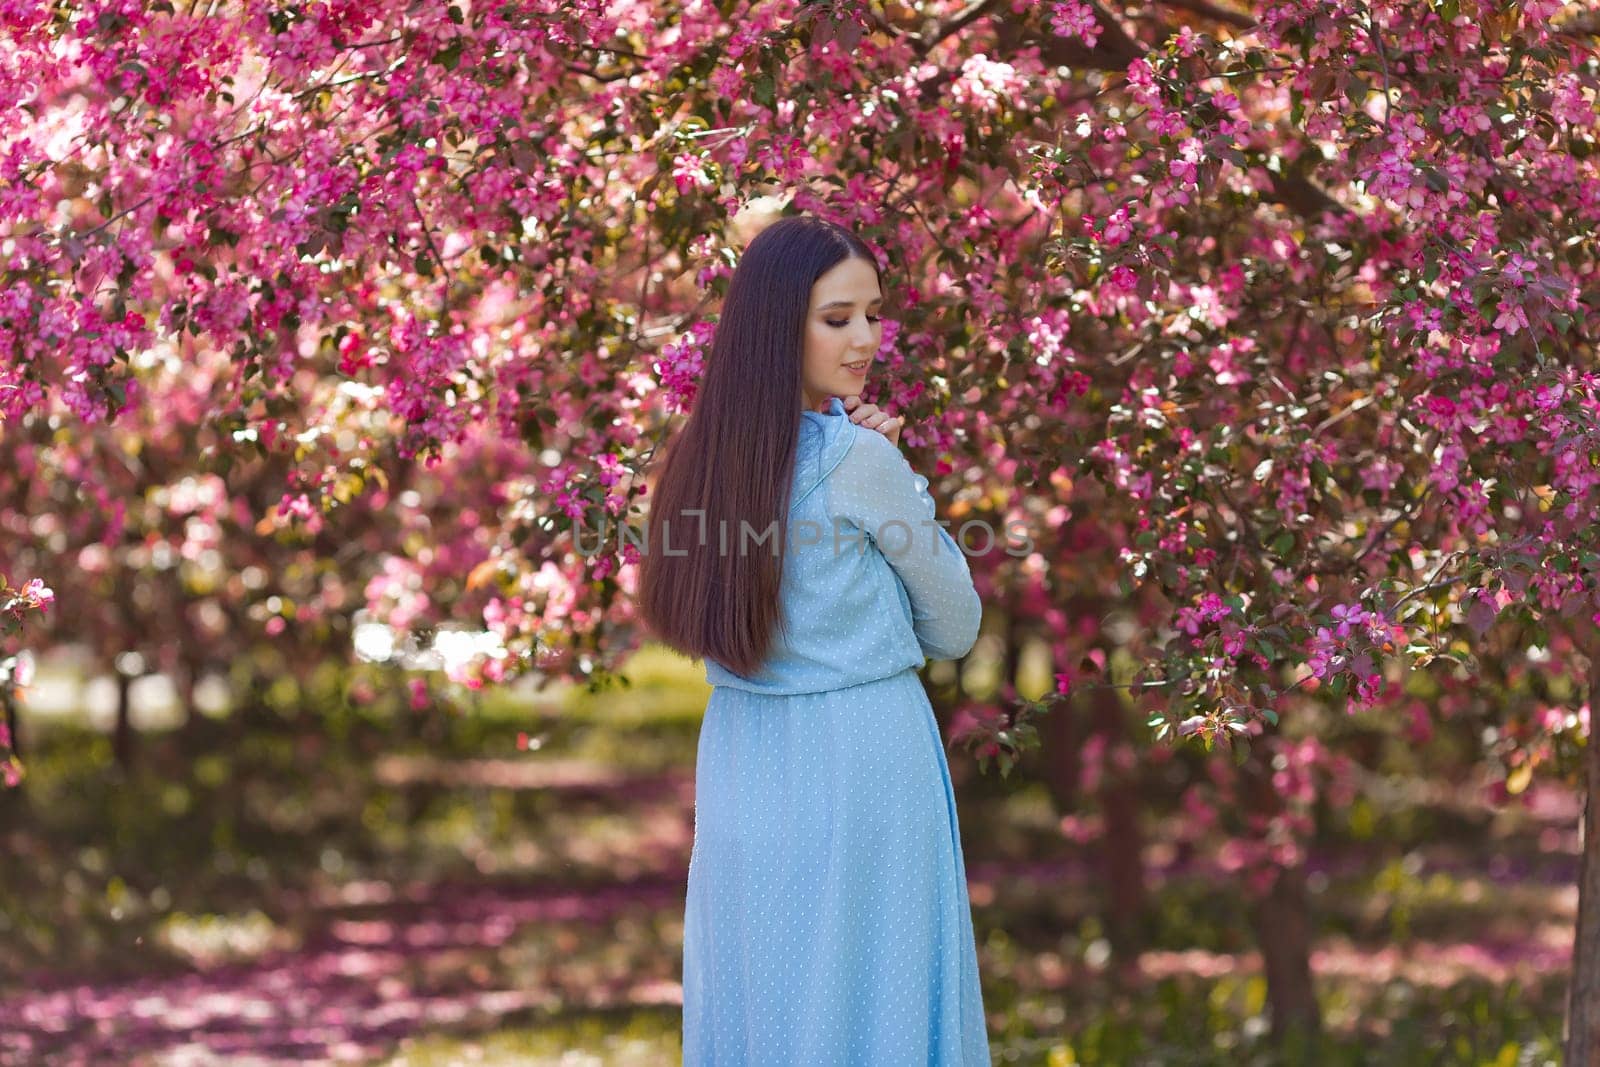 A pretty girl with long hair, in a light blue dress standing near pink blooming garden, in the garden. Rear view. Close up. Copy space